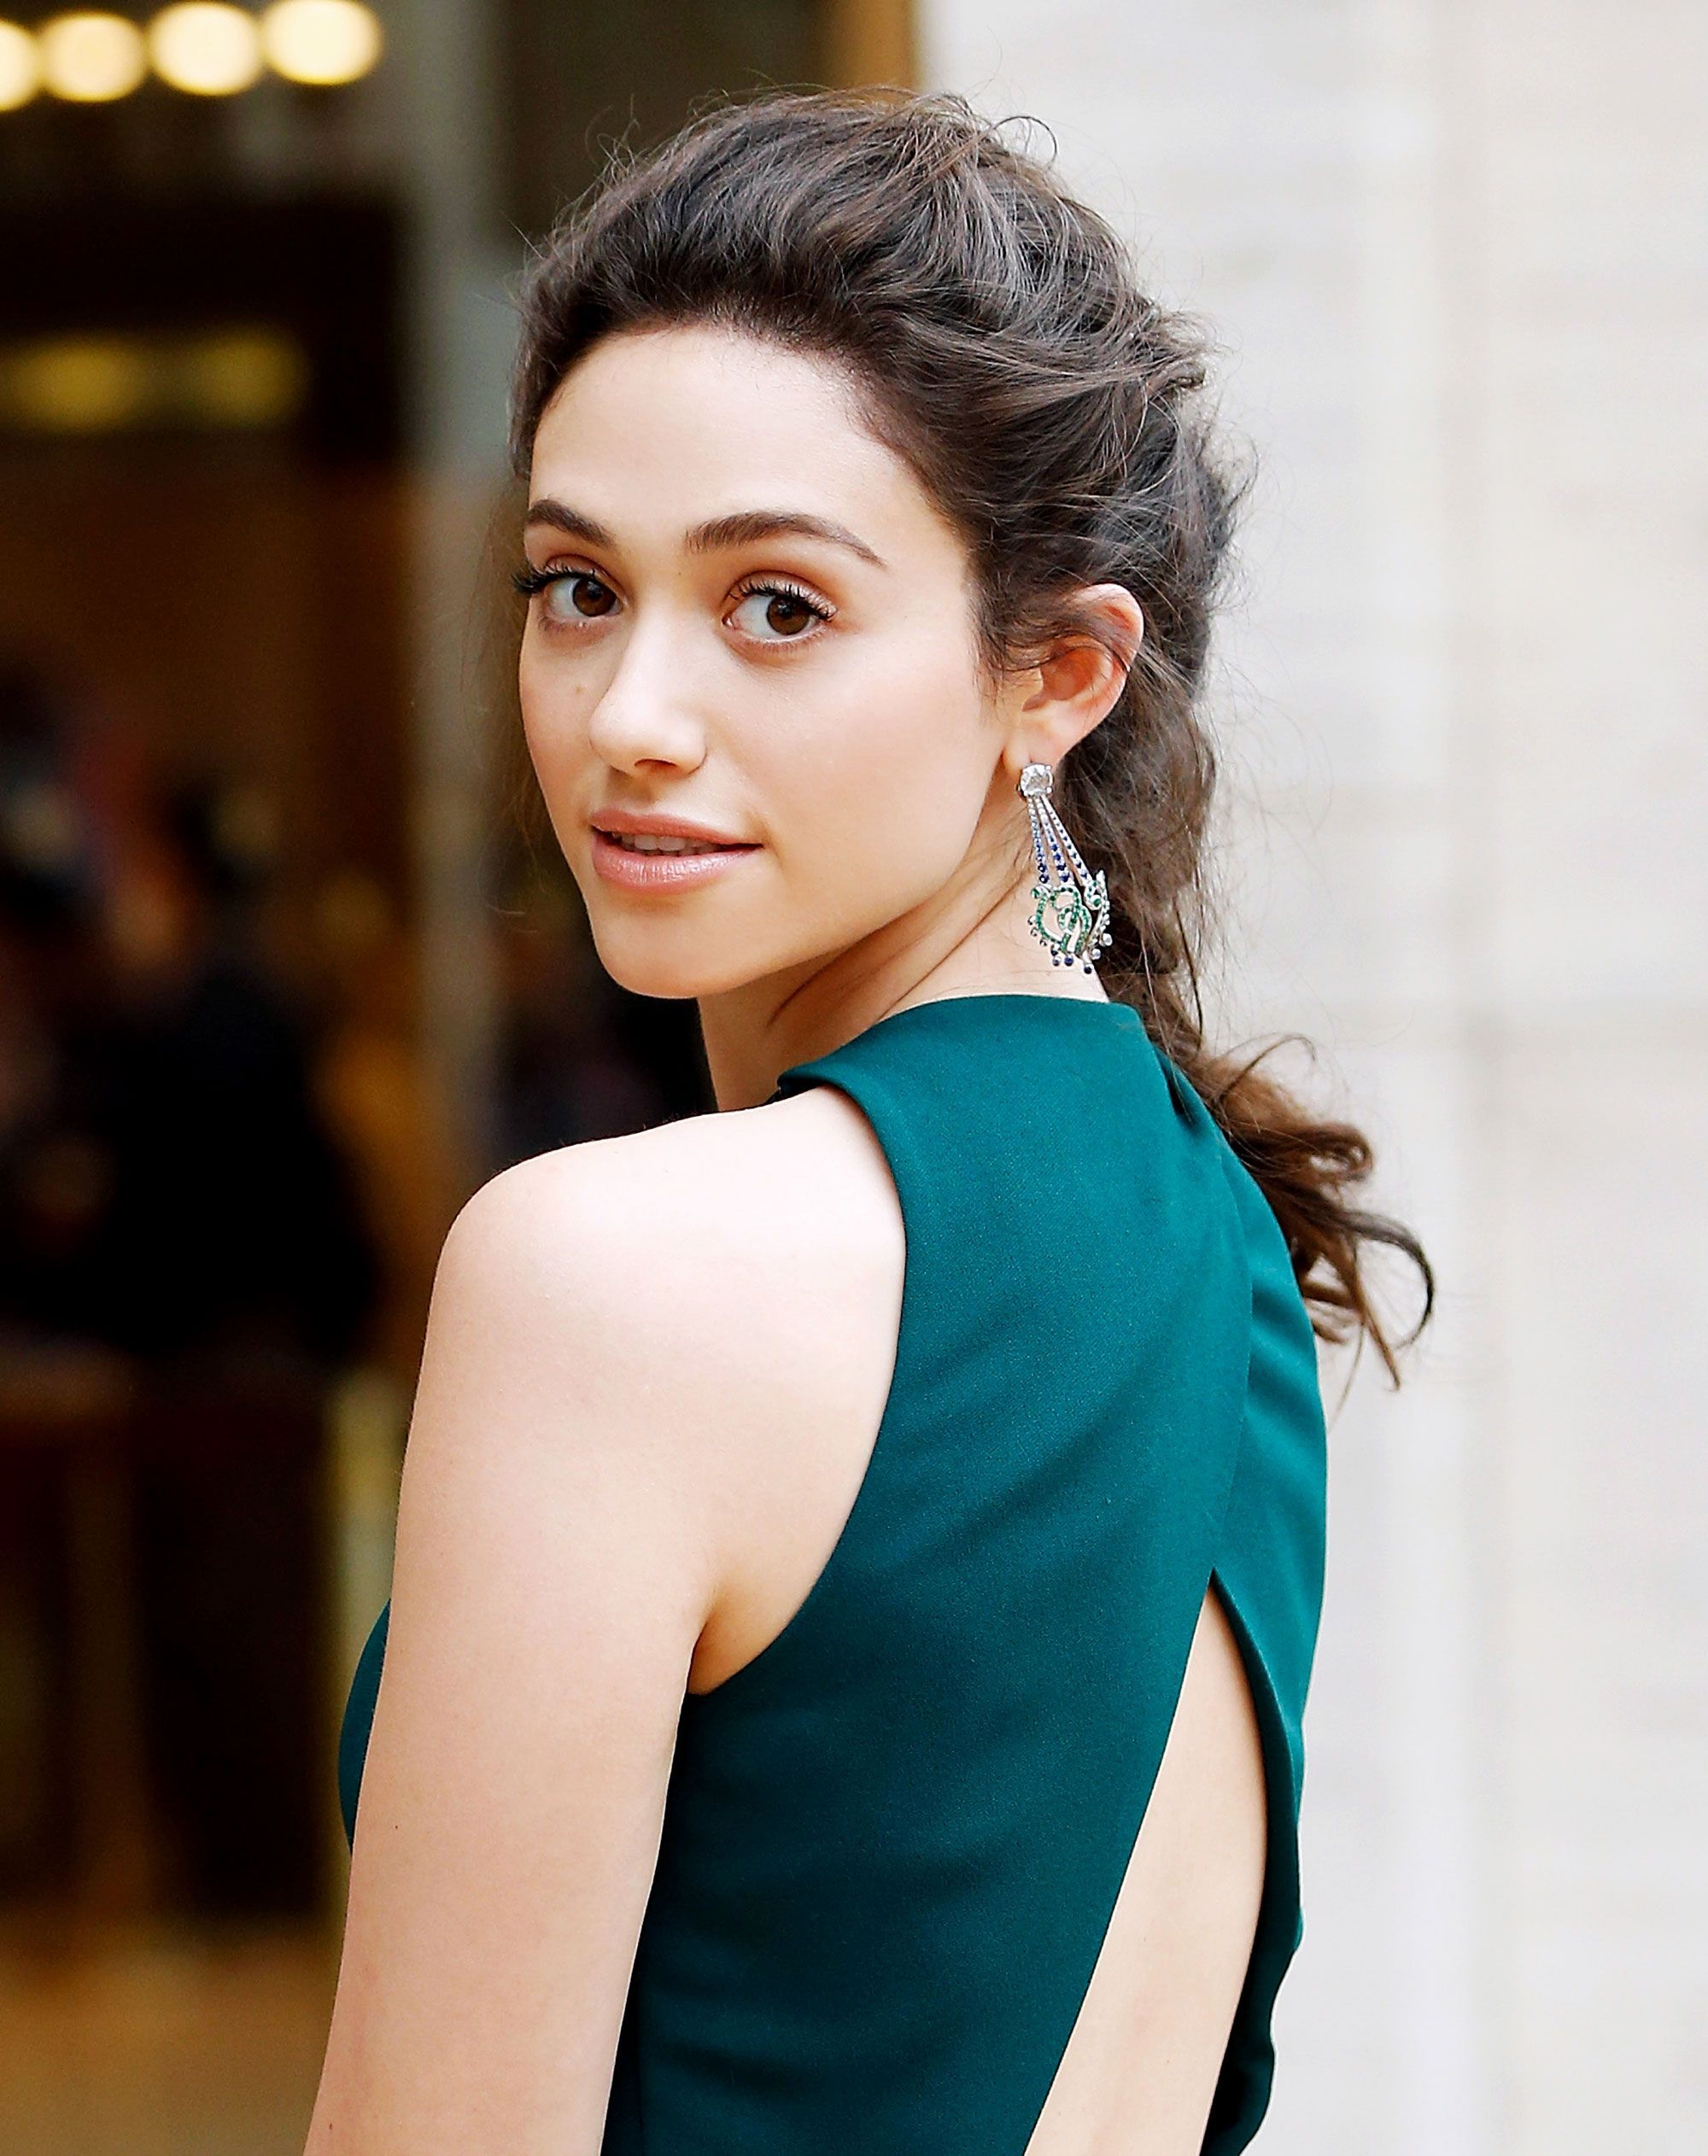 The perfect “no makeup” makeup look on Emmy Rossum. Click through for tips from her makeup artist on how to get this look. #beauty